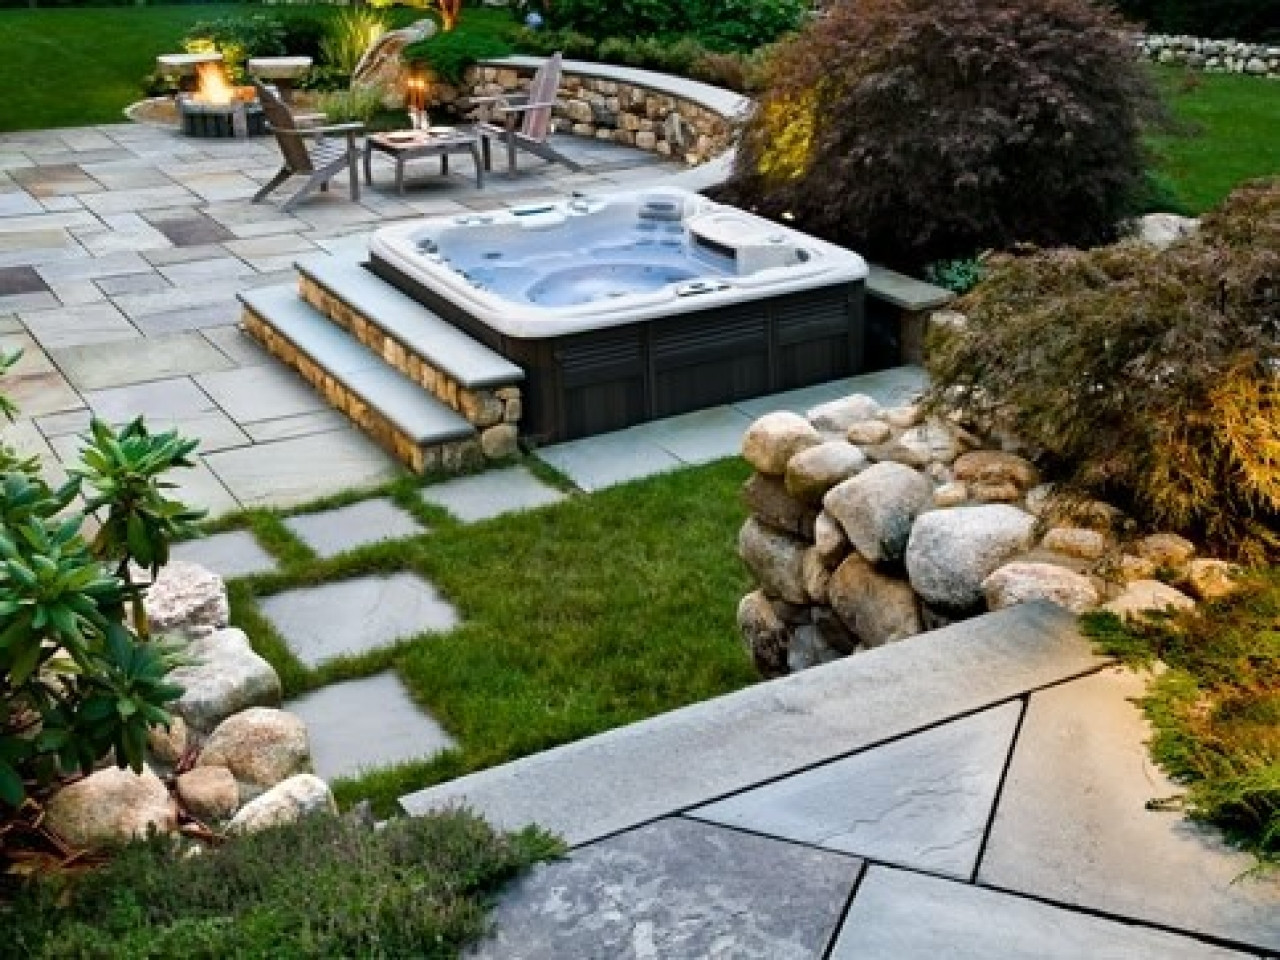 Outdoor Hot Tub Landscaping Ideas
 Hot tub patio ideas idea landscaping back yard with hot